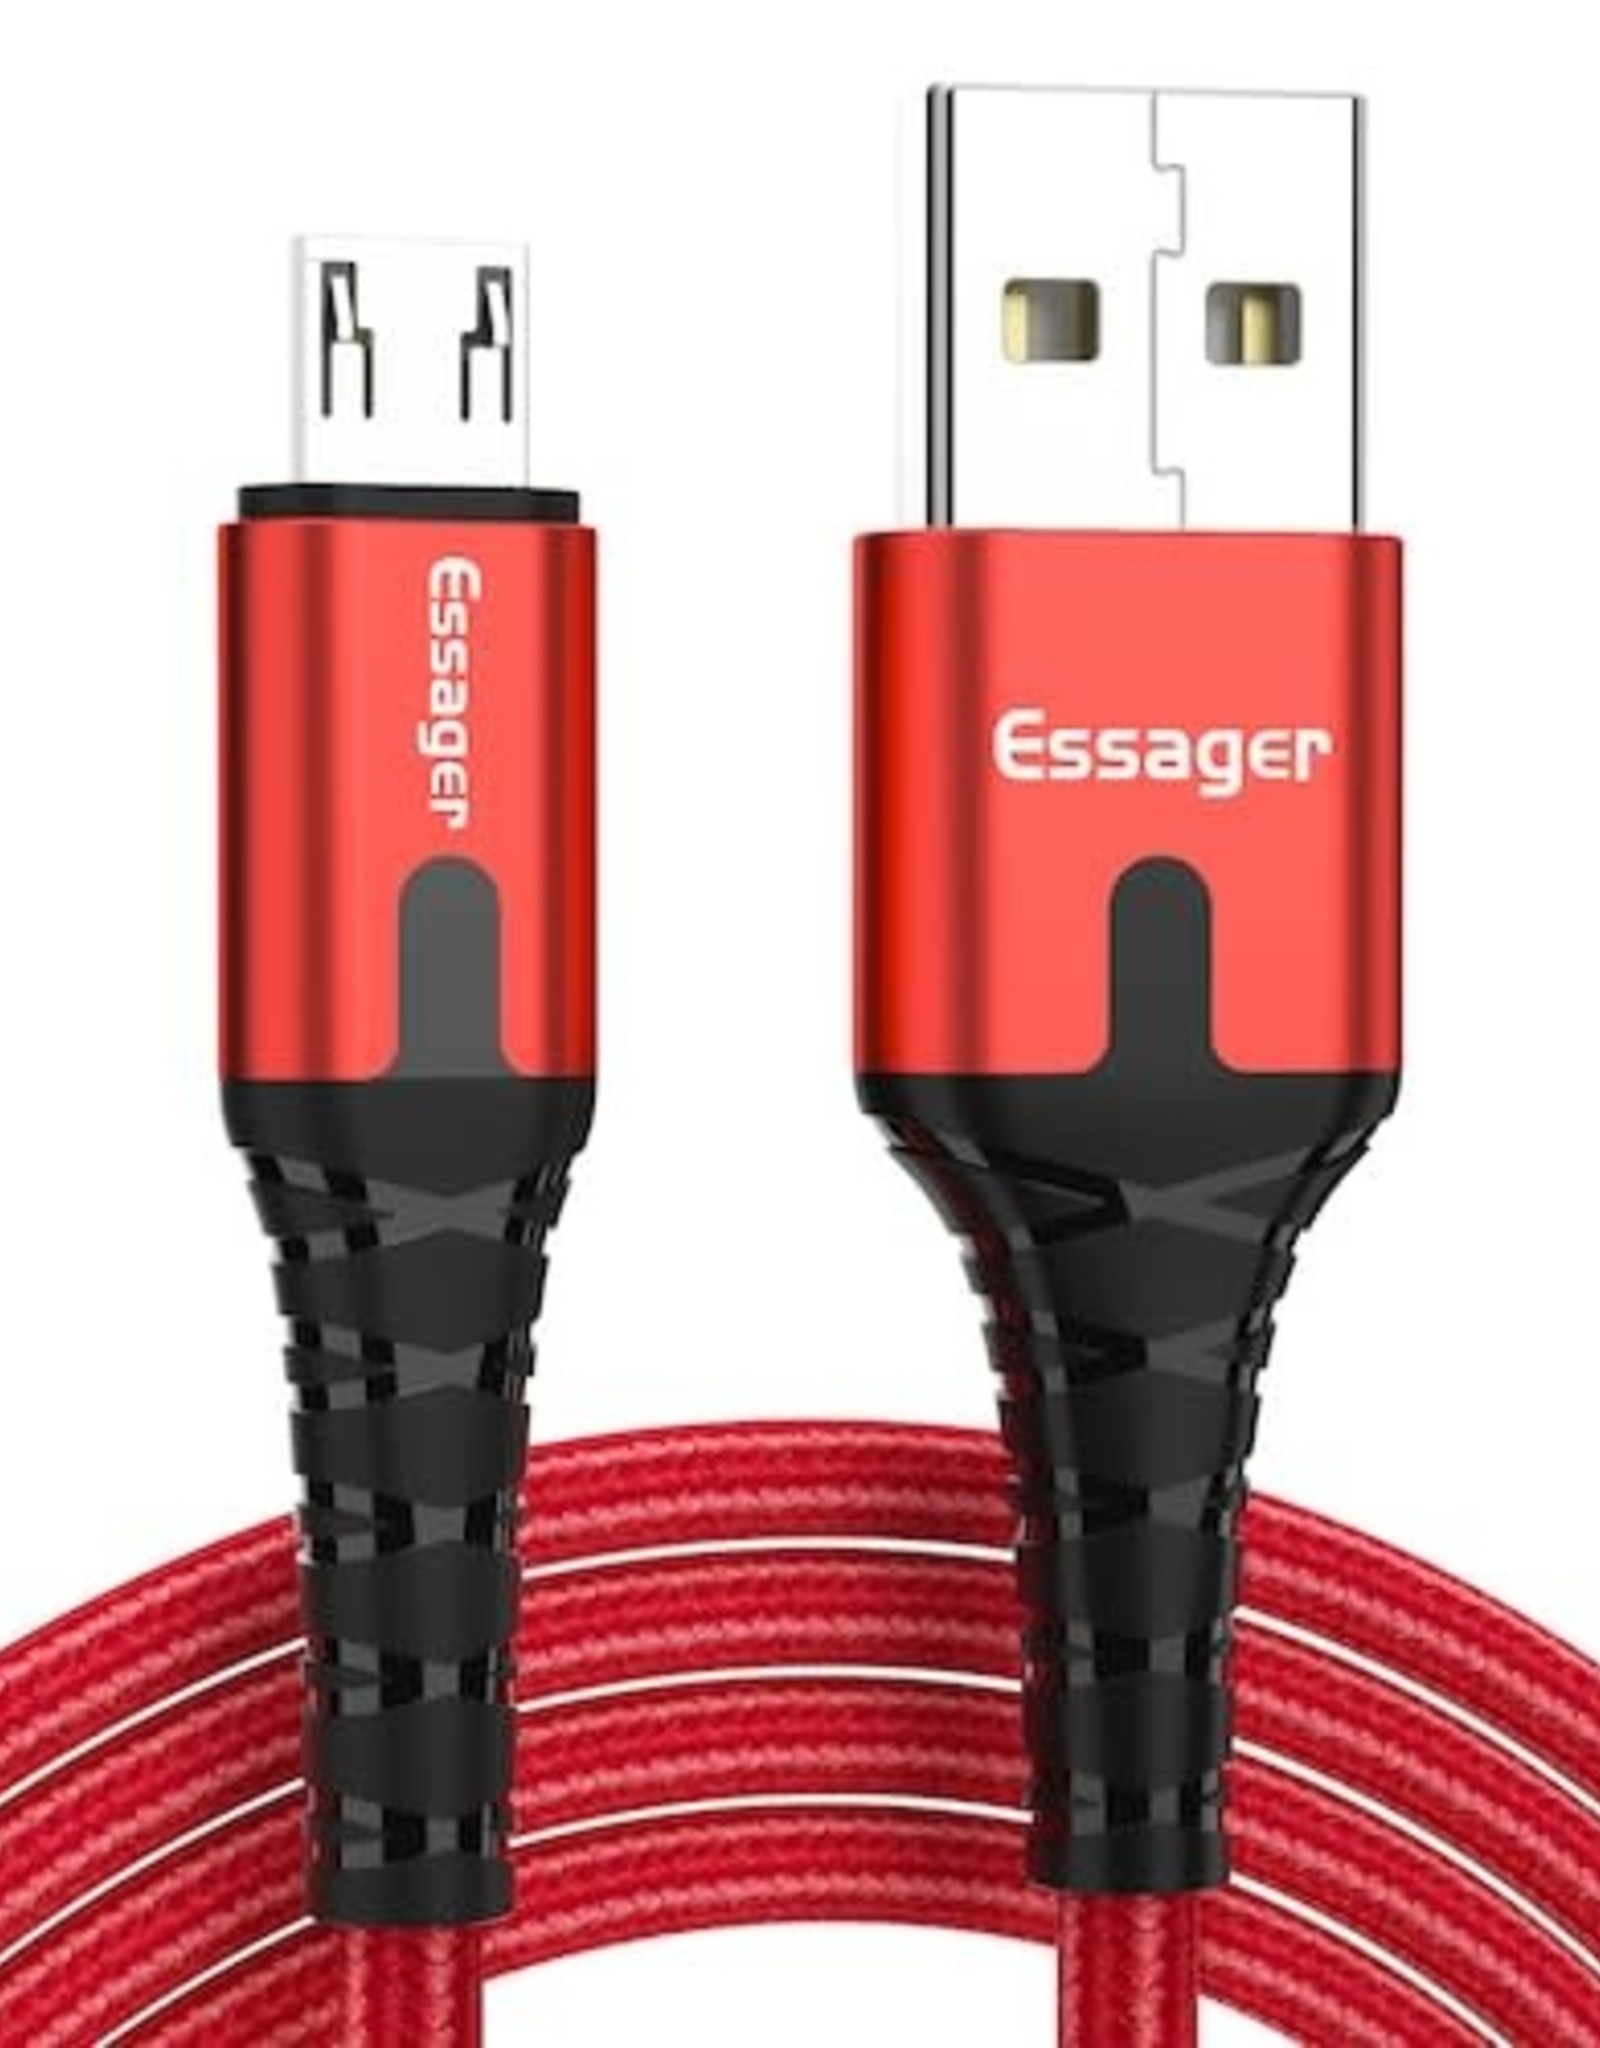 Essager ESSAGER Micro USB to USB Nylon Braided Data Charging Cord w/ LED Indicator 2m